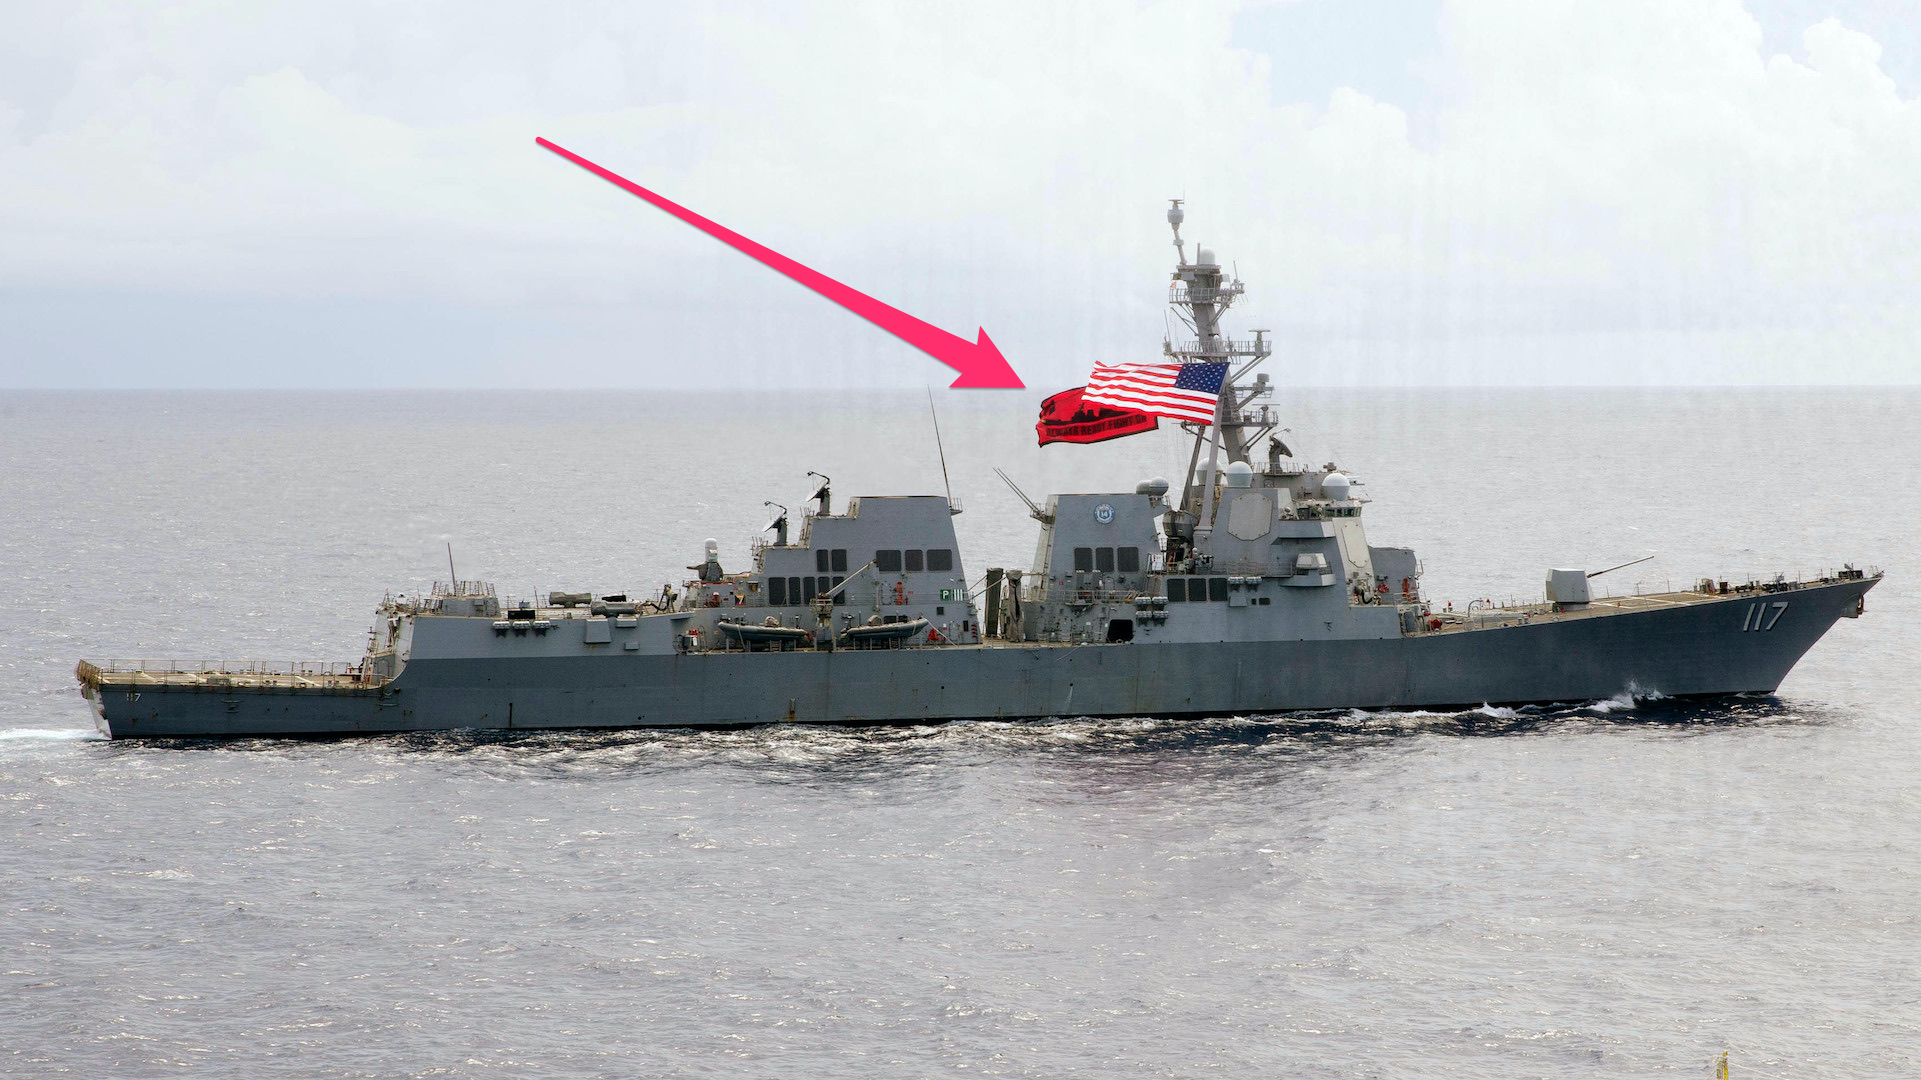 Navy destroyer USS Paul Ignatius spotted rocking new battle flag